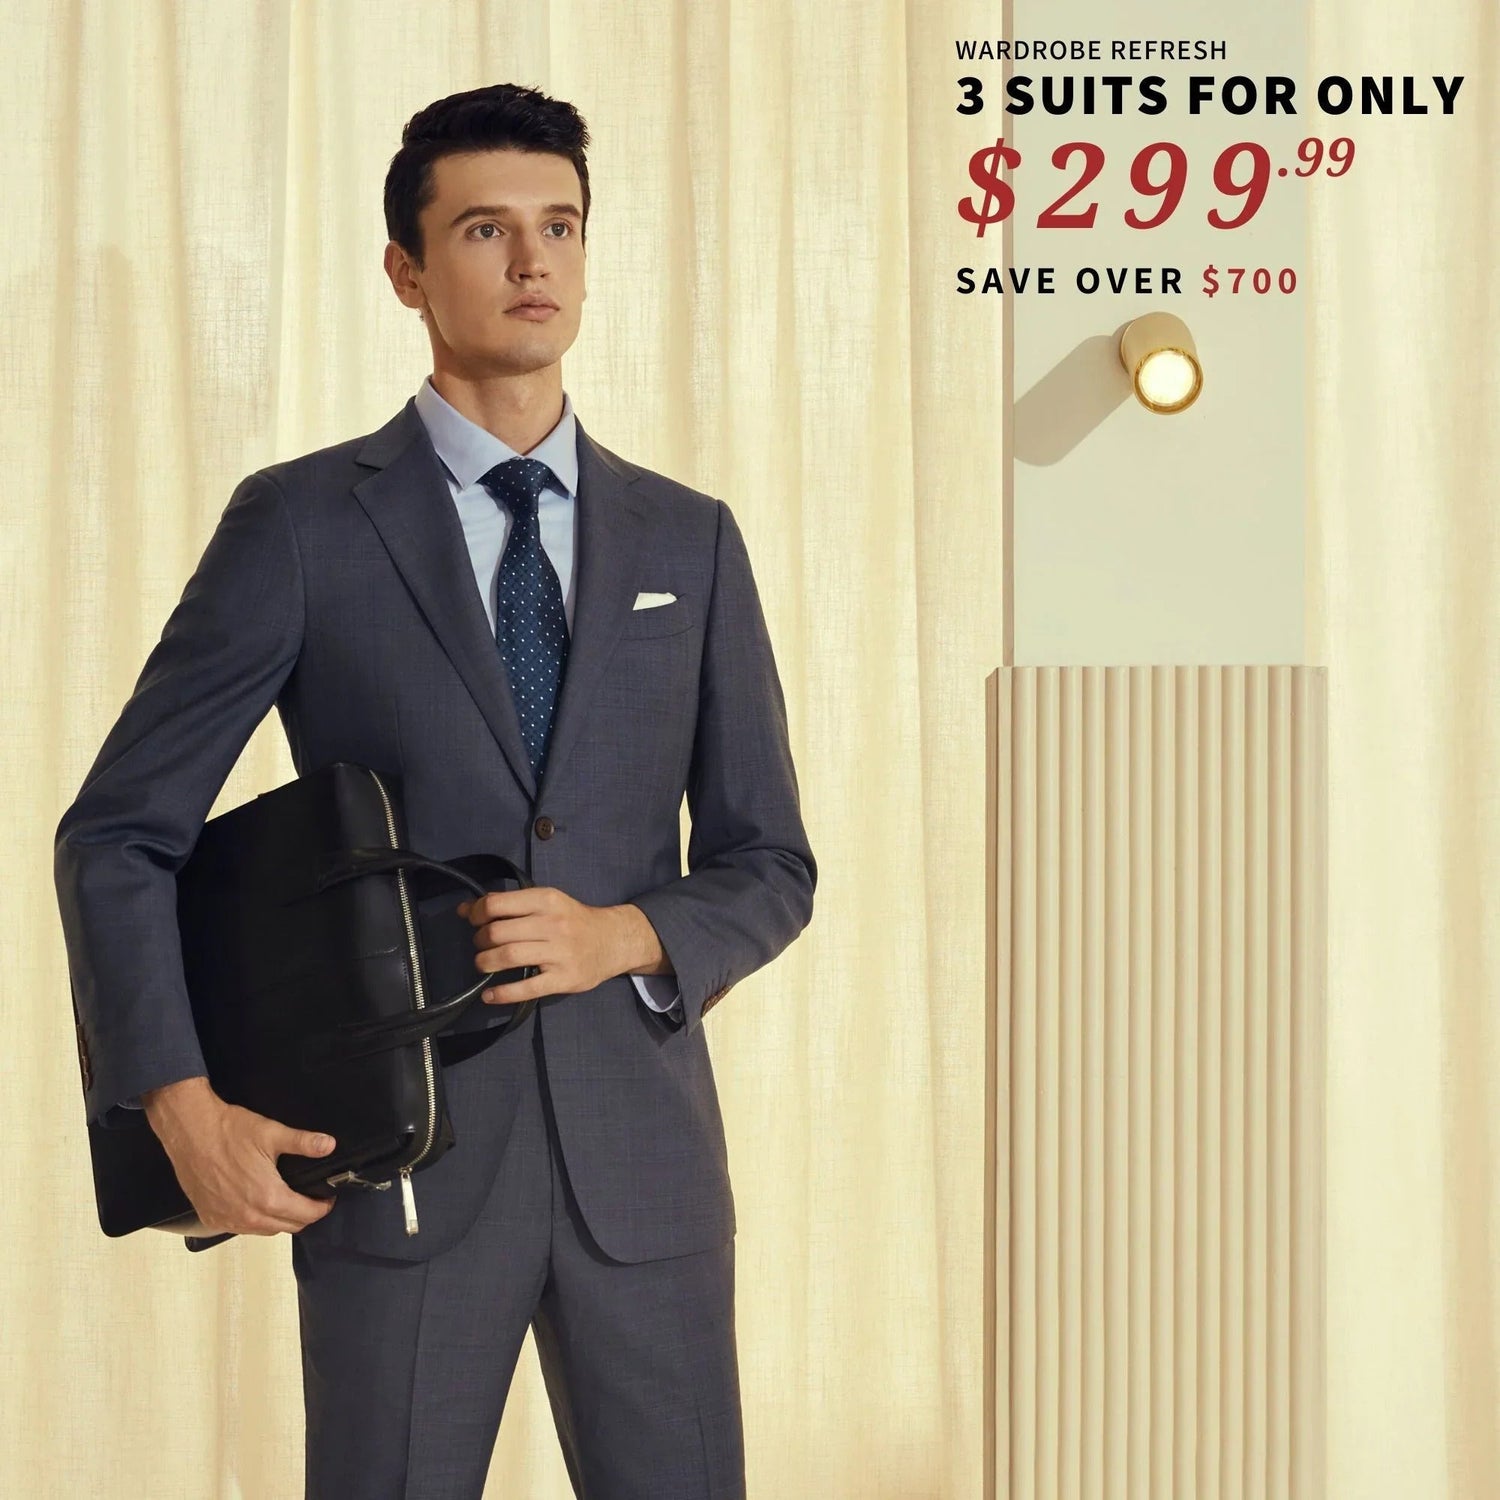 A man in a tailored suit is holding a BYOB briefcase.